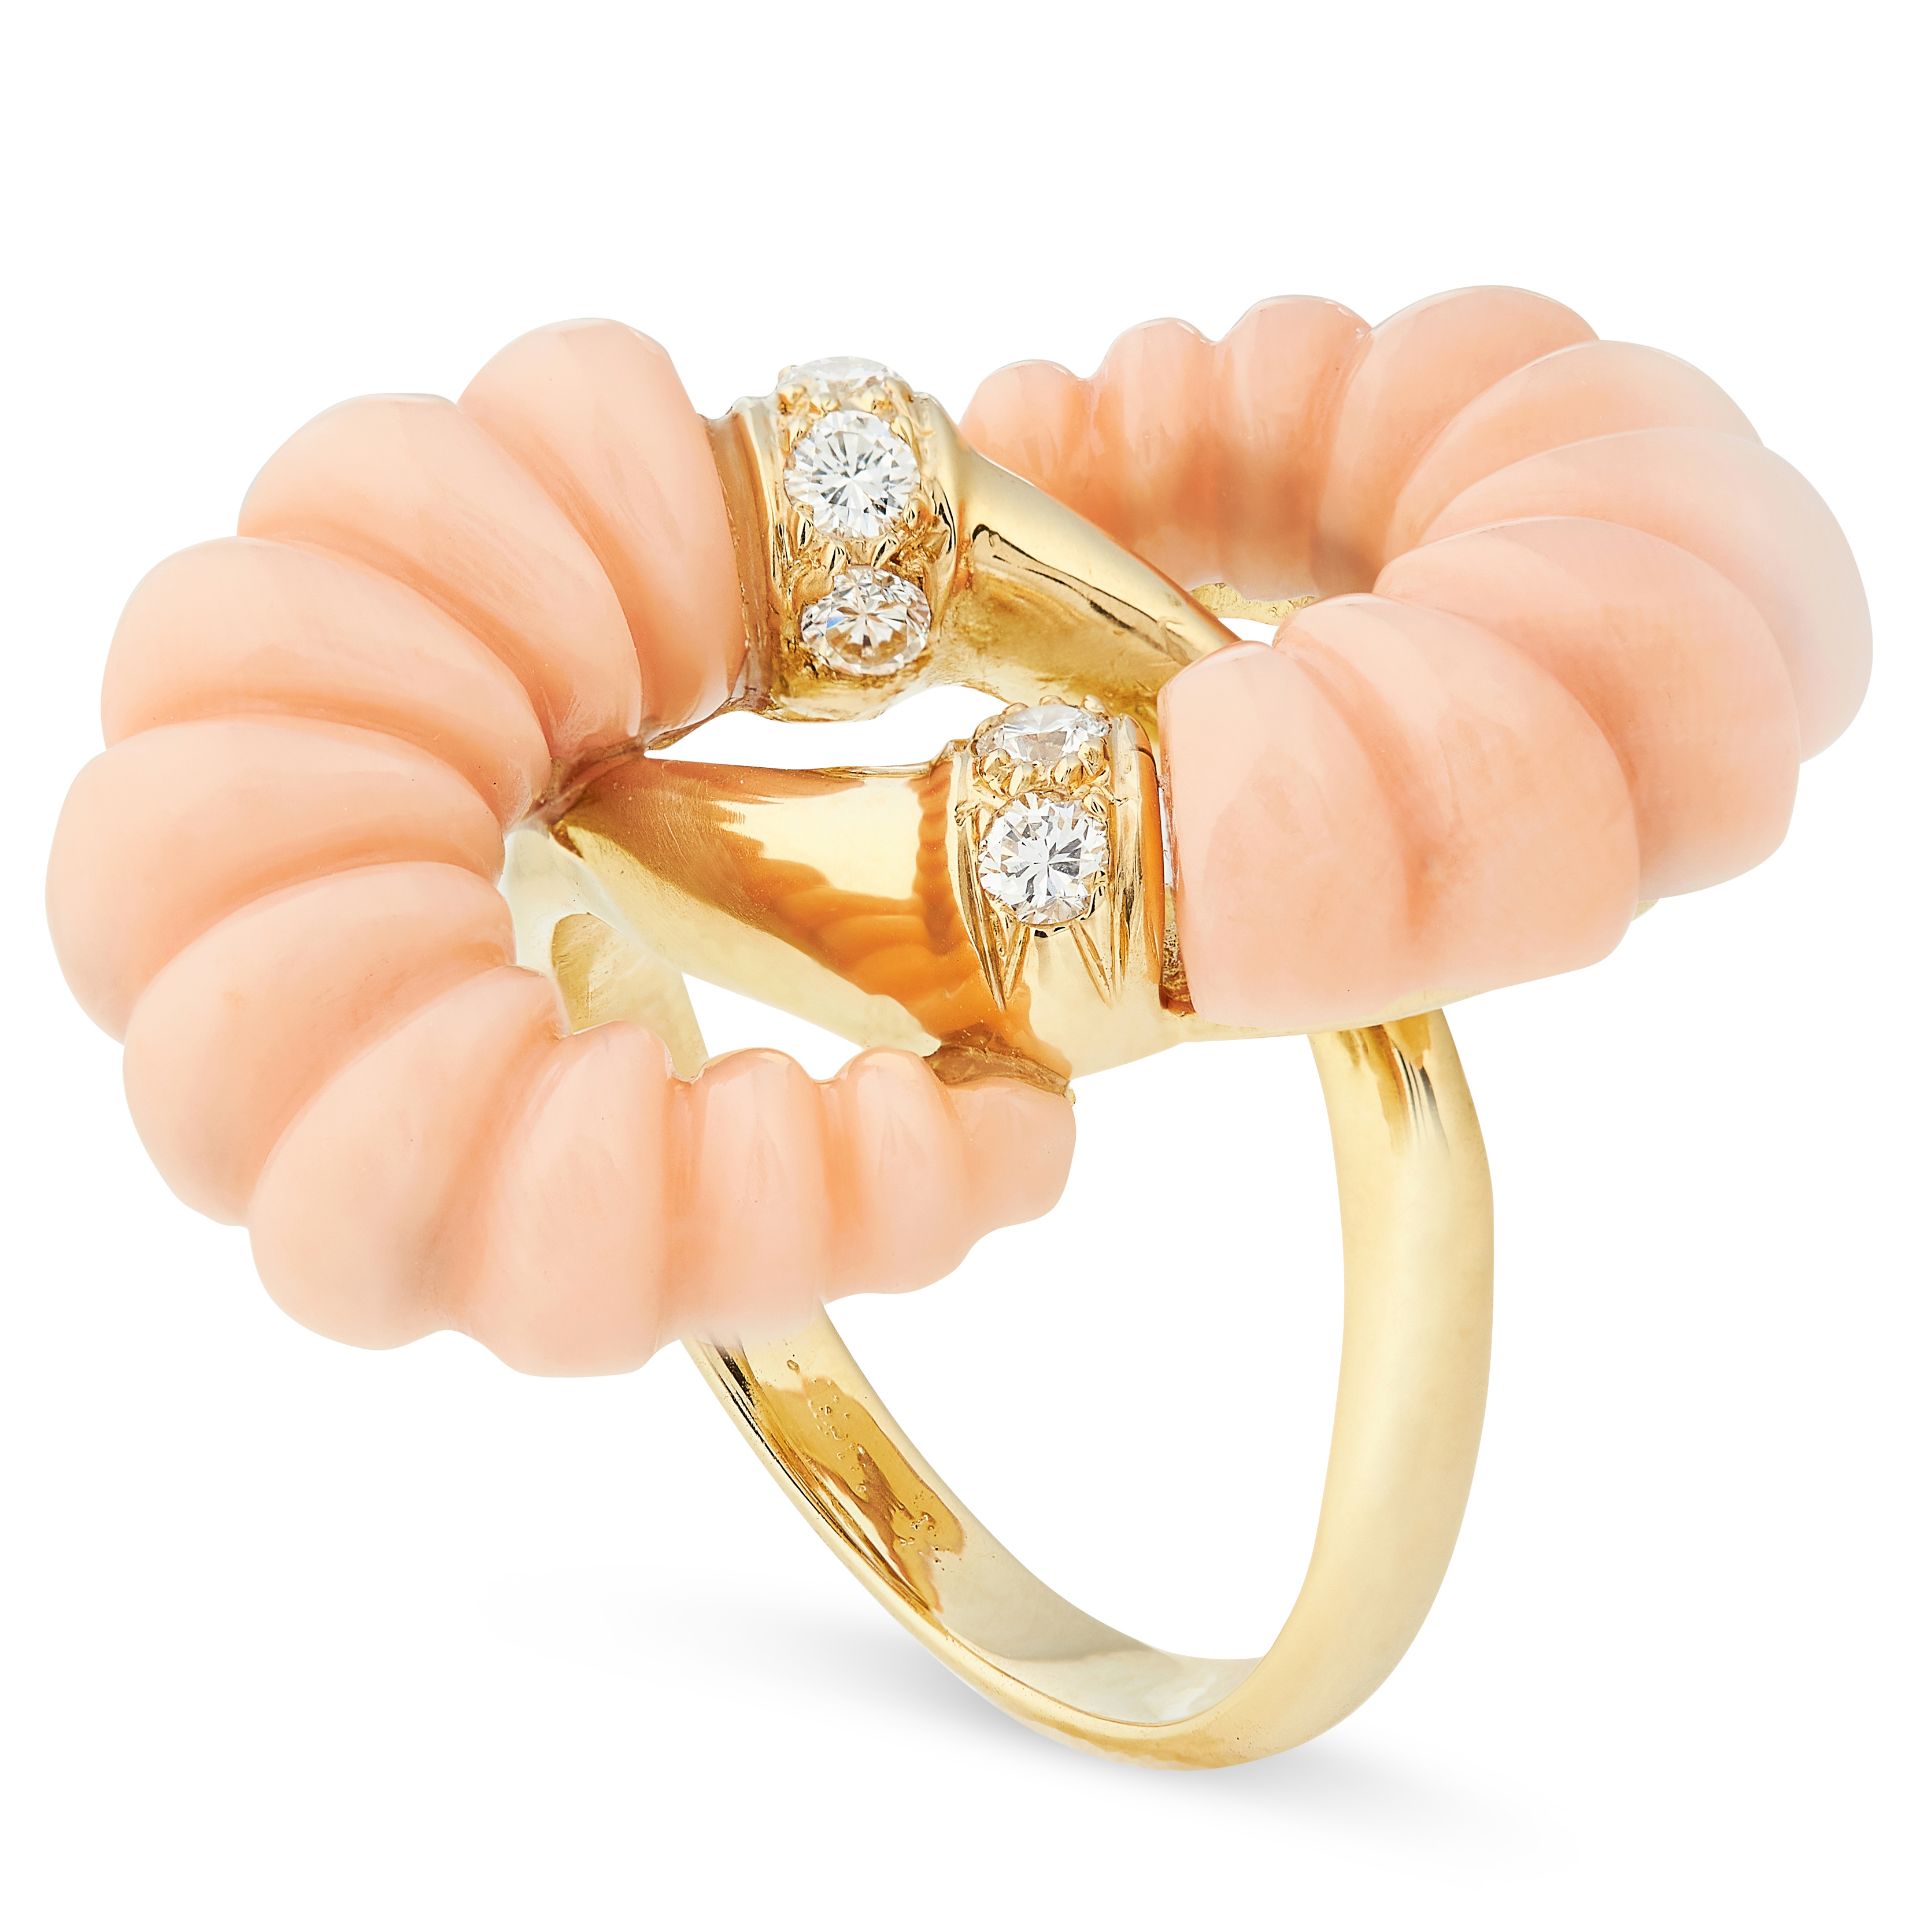 A VINTAGE CORAL AND DIAMOND RING, VAN CLEEF & ARPELS in 18ct yellow gold, the face formed of two - Image 2 of 2